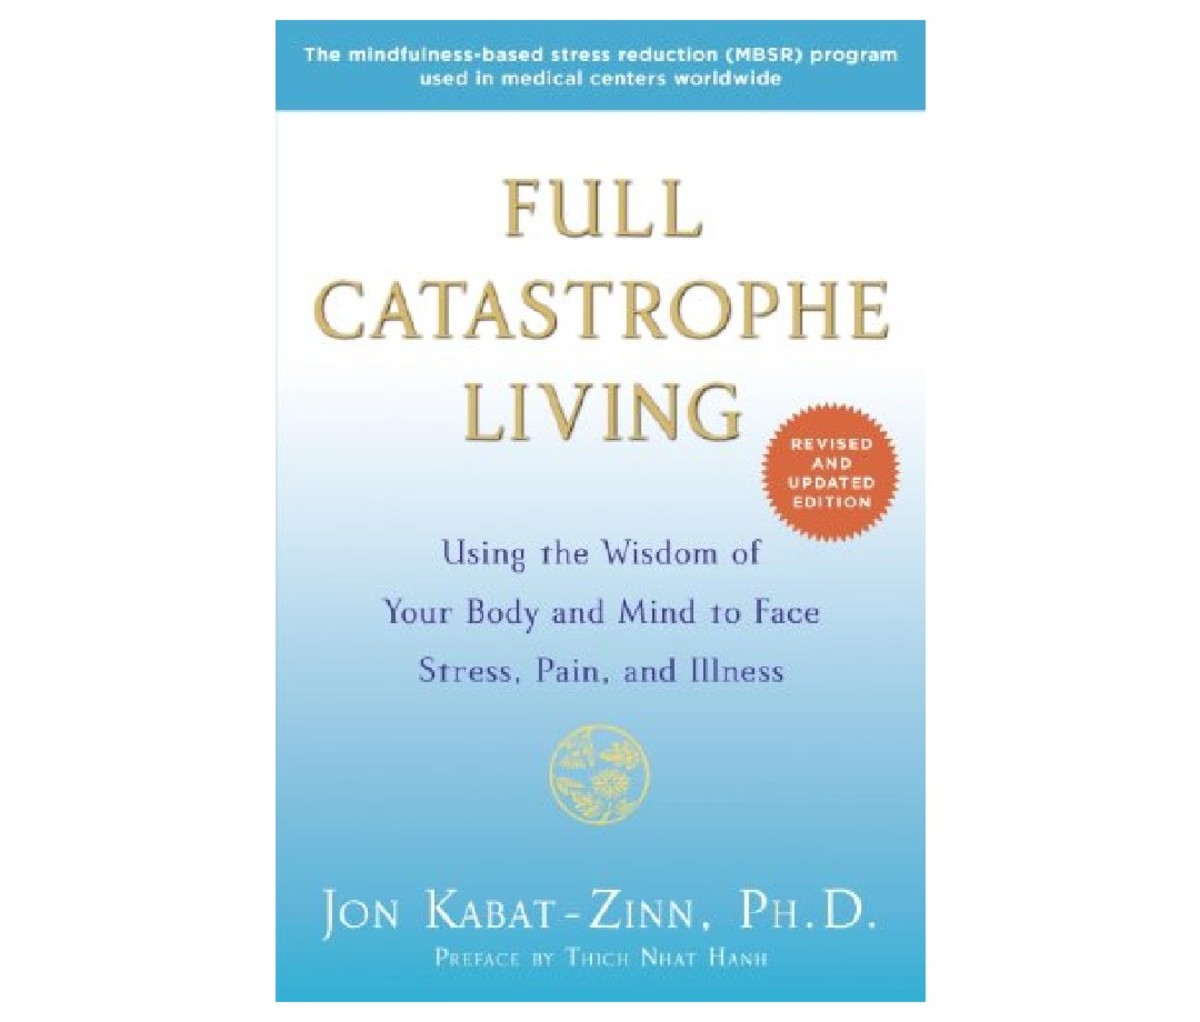 Living in Full Disaster: Using the Wisdom of Your Body and Mind to Confront Stress, Pain, and Disease by Jon Kabat-Zinn, PhD